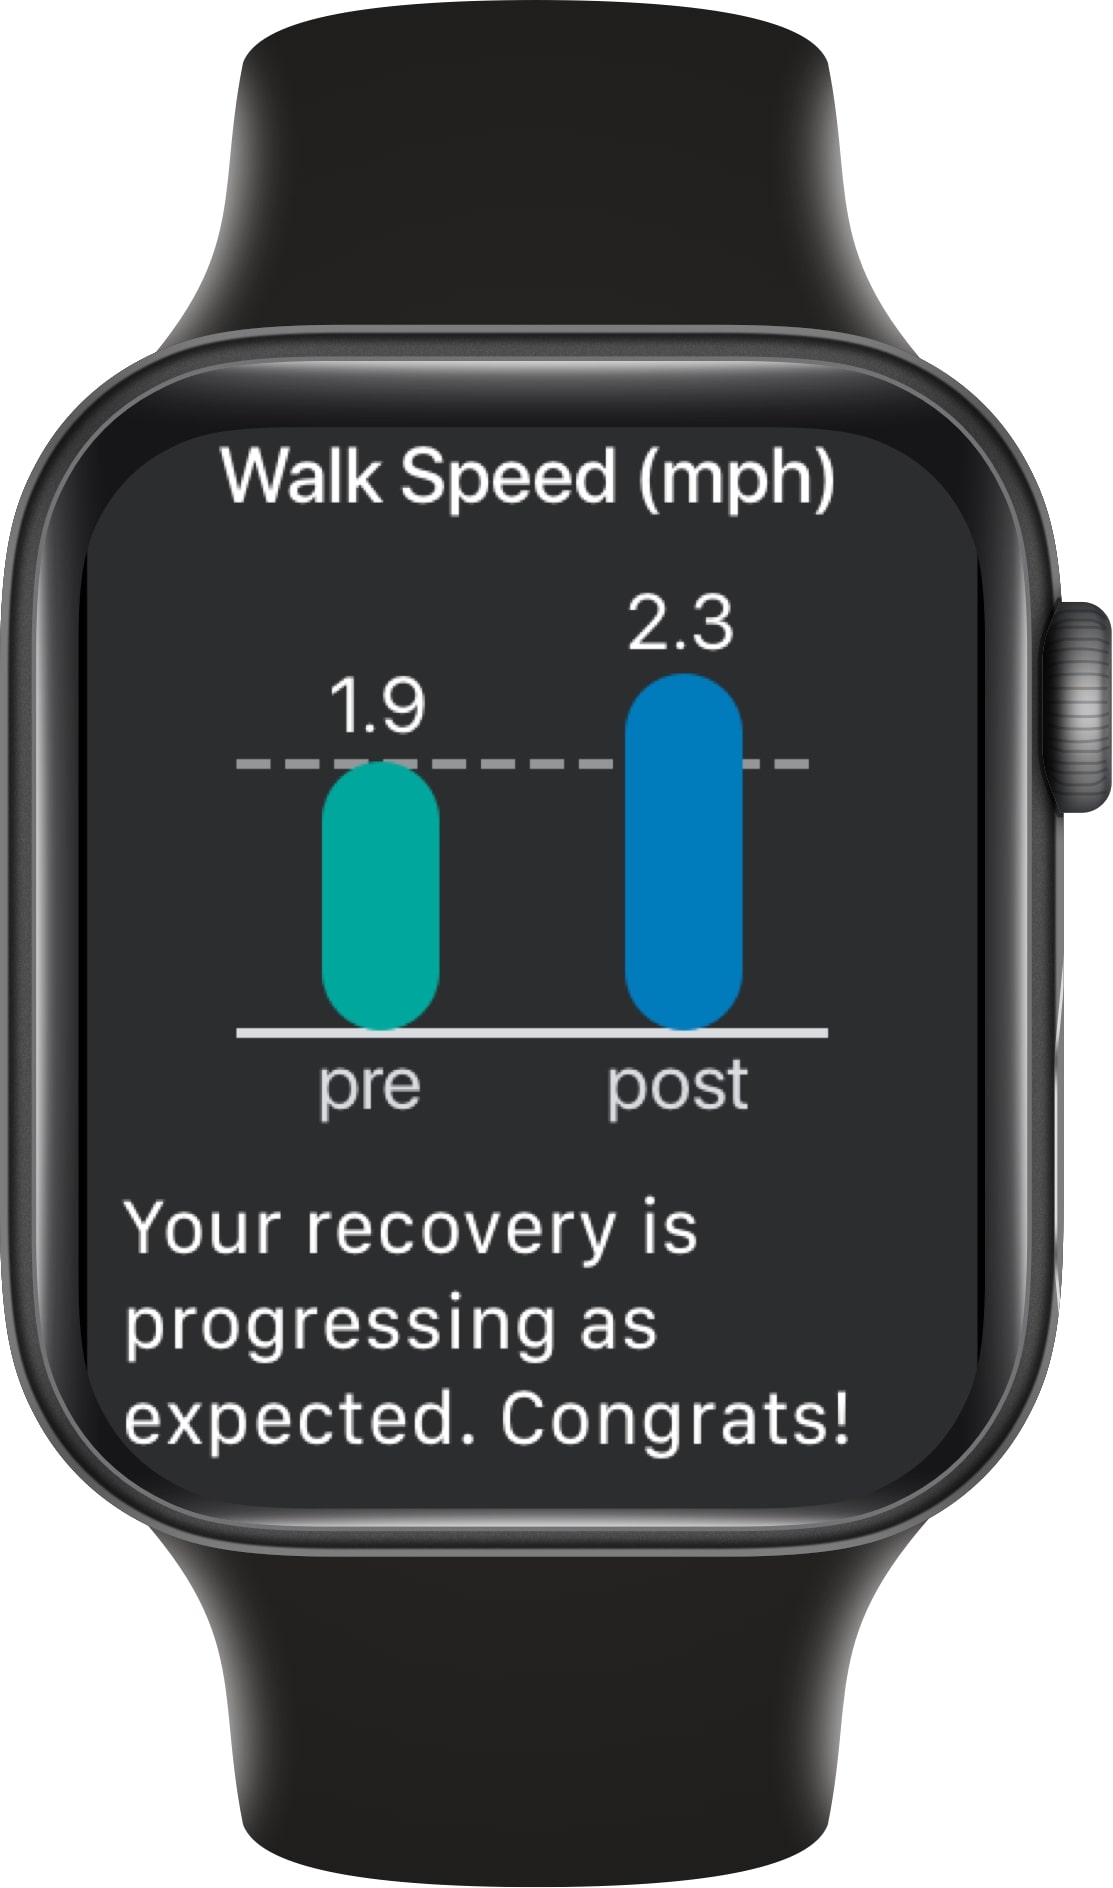 Patients receive notifications on the Apple Watch or iPhone reminding them to complete any education, questionnaires, and exercises for the day.